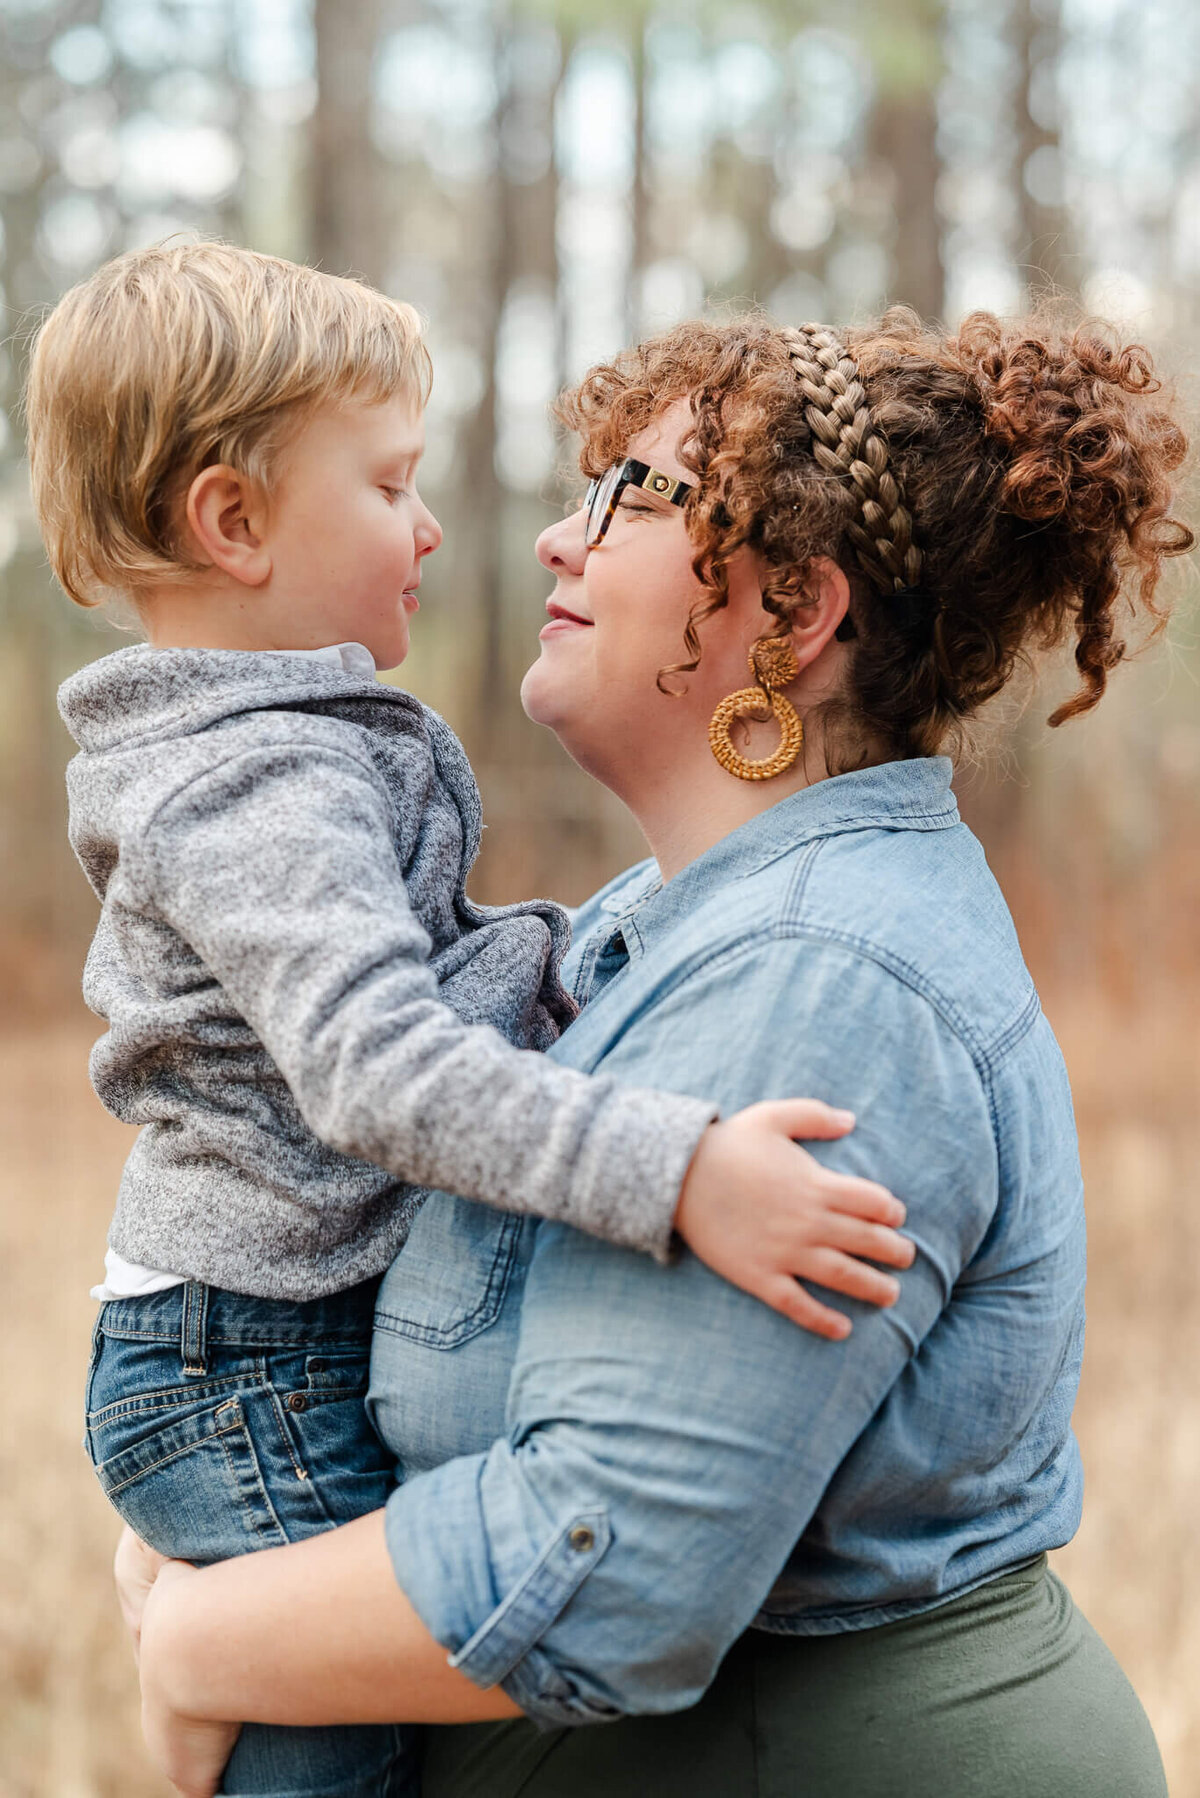 A mother holds her young son during their Chesapeake family photography session. They look into each other's eyes and smile.